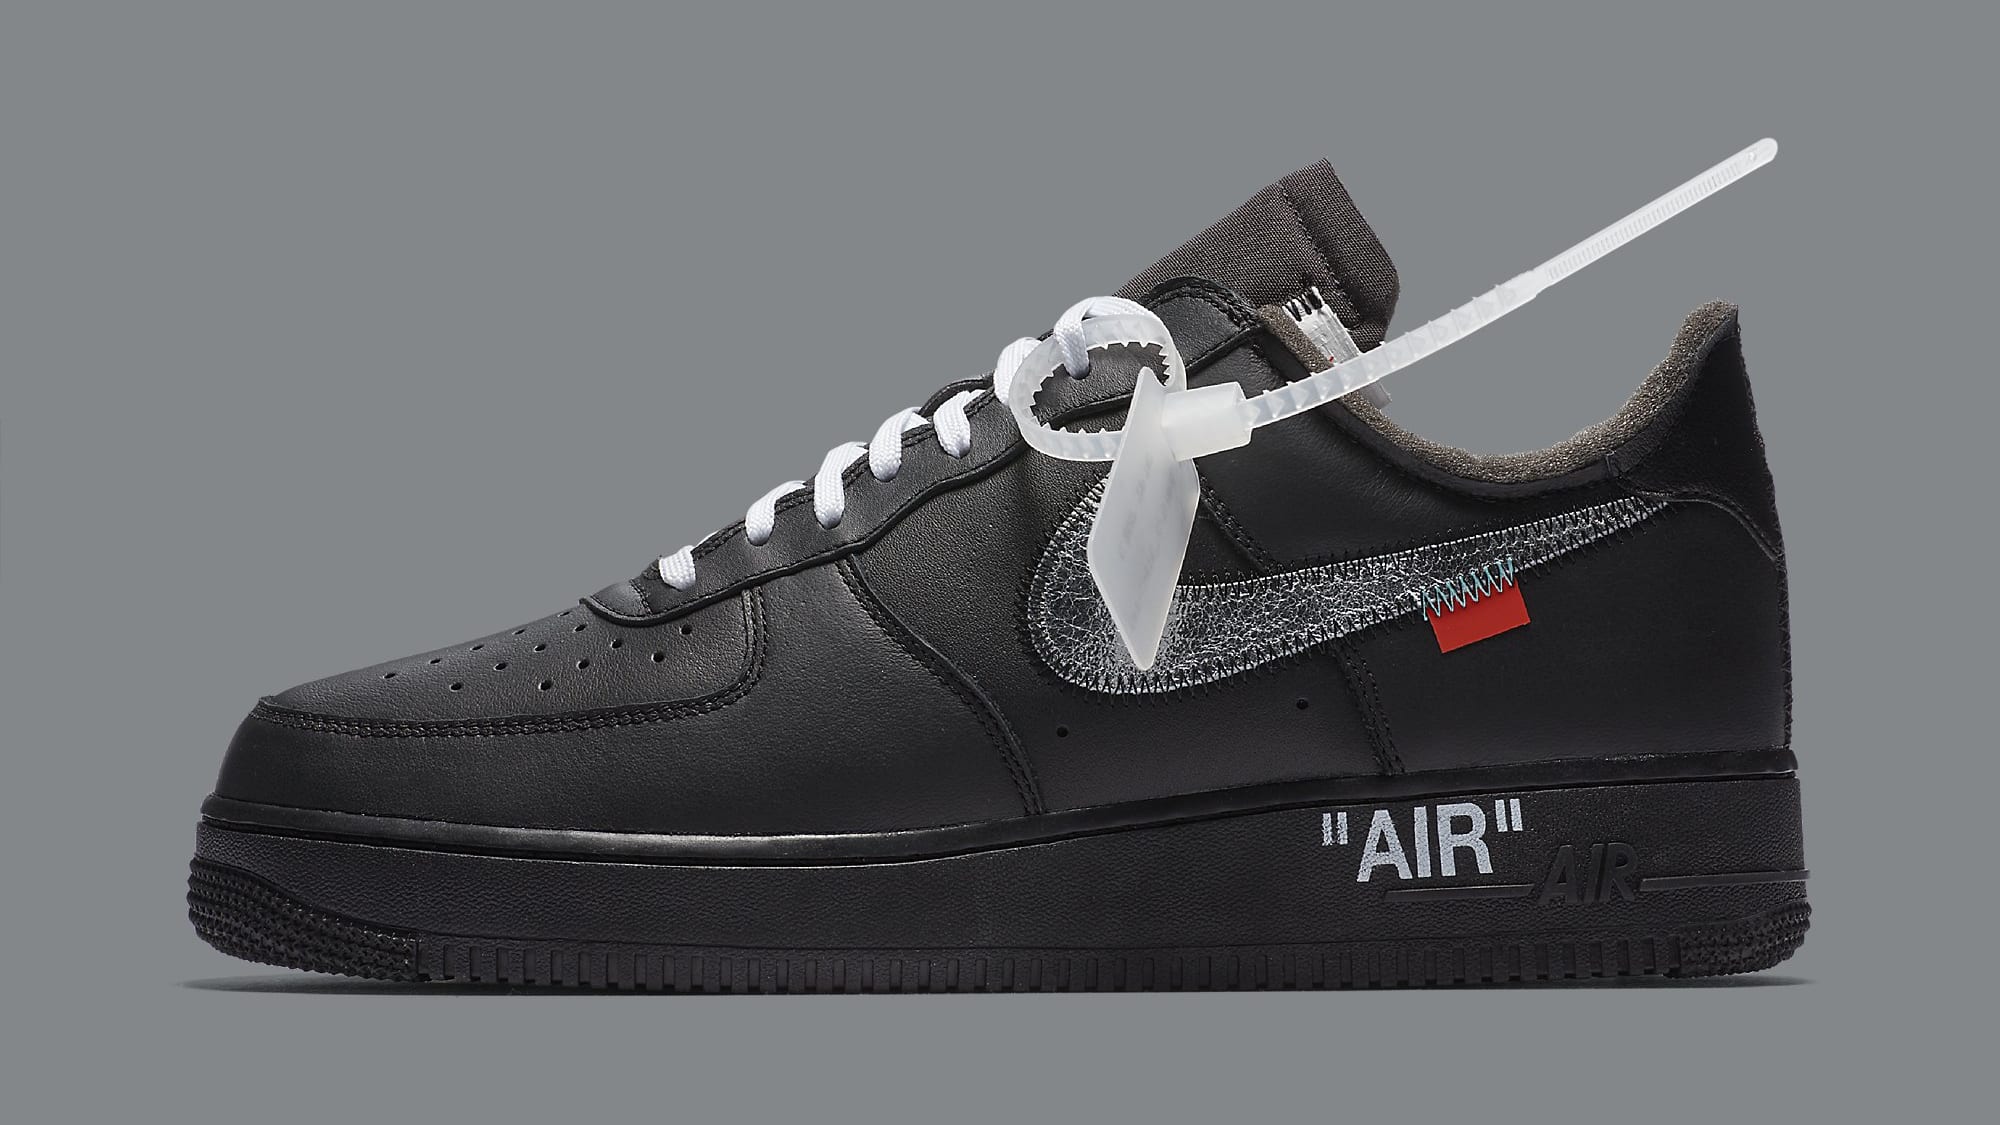 Off-White x Nike AF1 Low MoMa Images Surface, Sparking Release